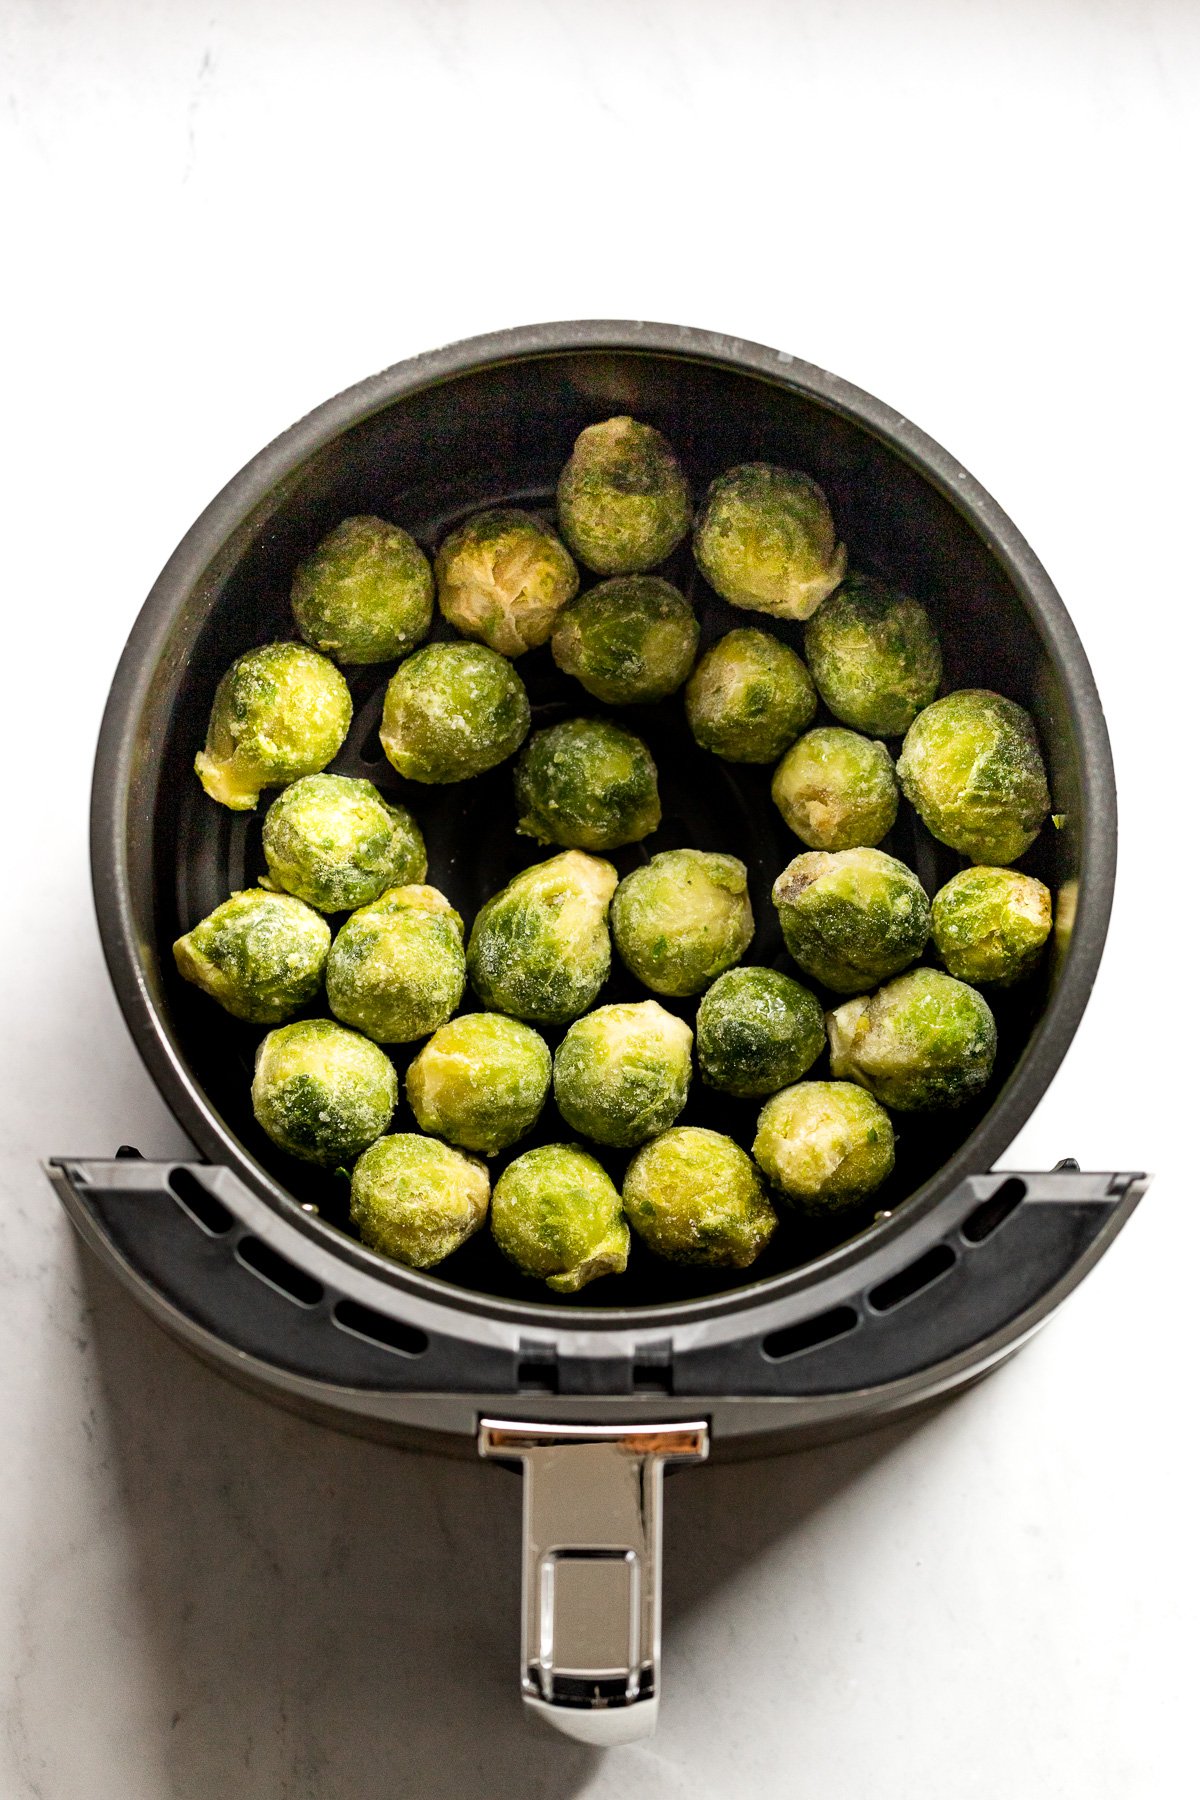 Frozen brussels in air fryer before cooking.